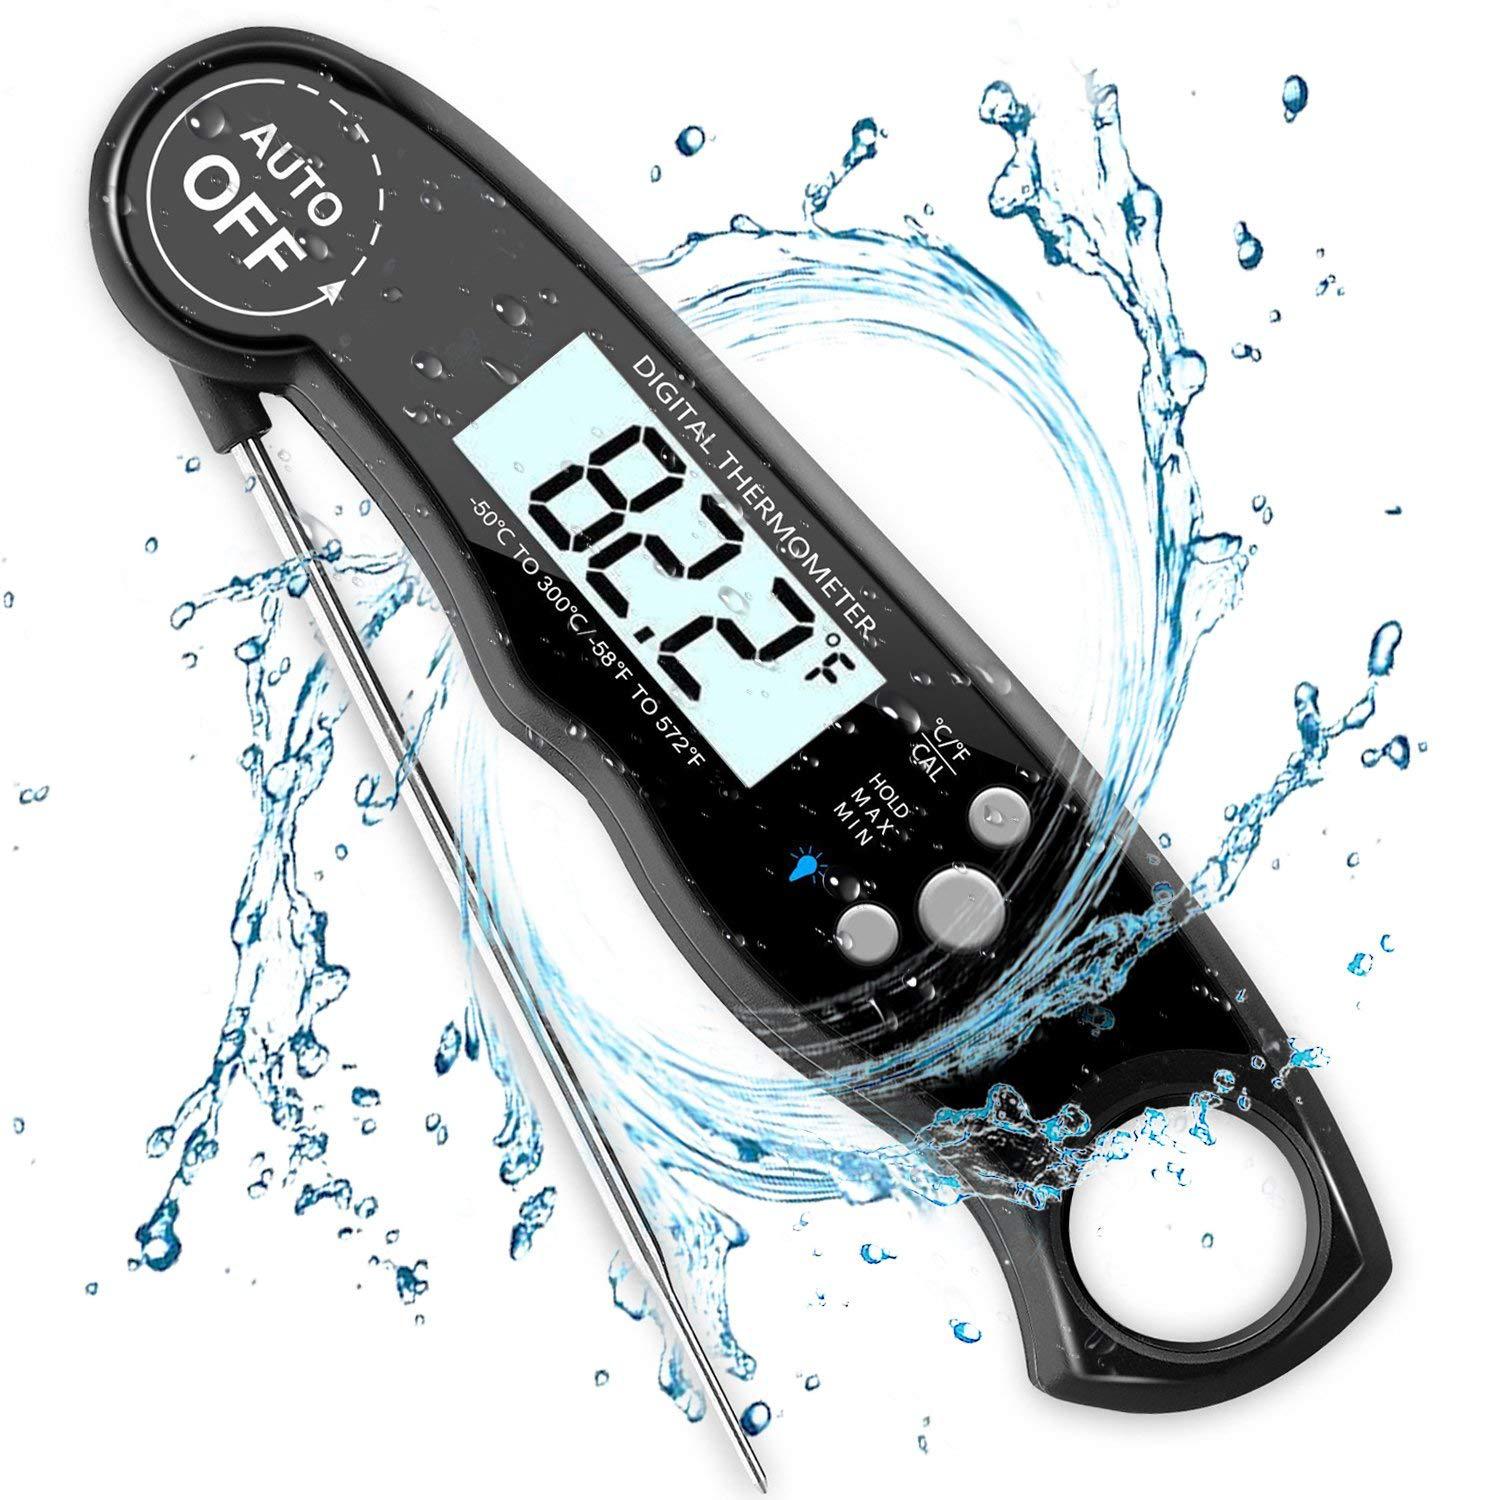  Waterproof Digital Meat Thermometer for Cooking